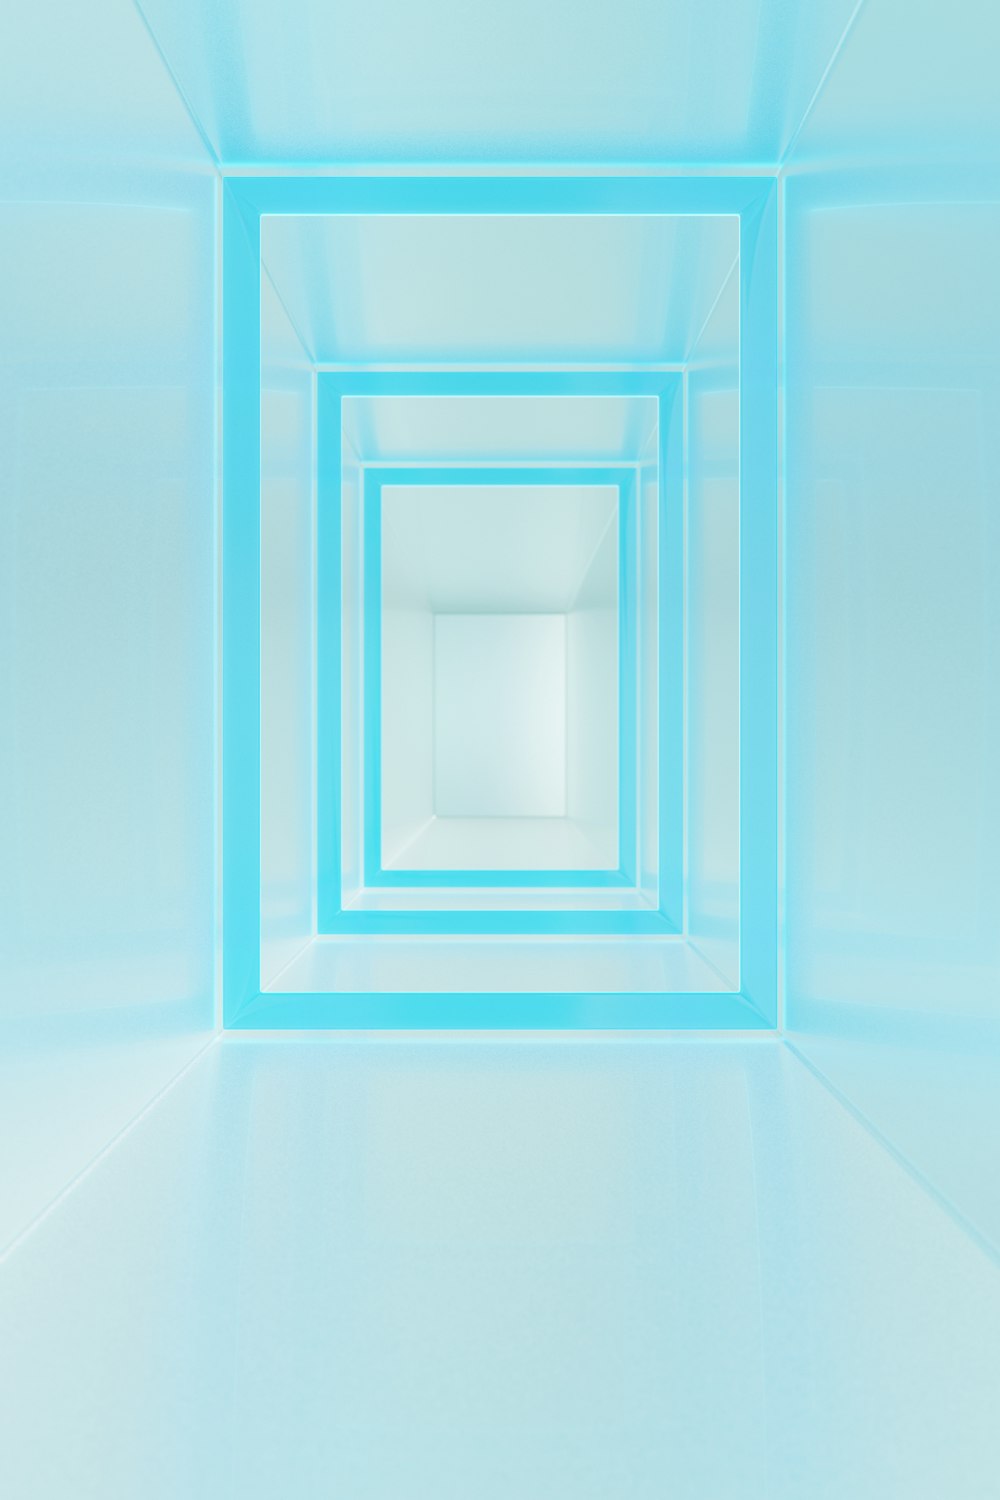 a white room with a blue square in the center